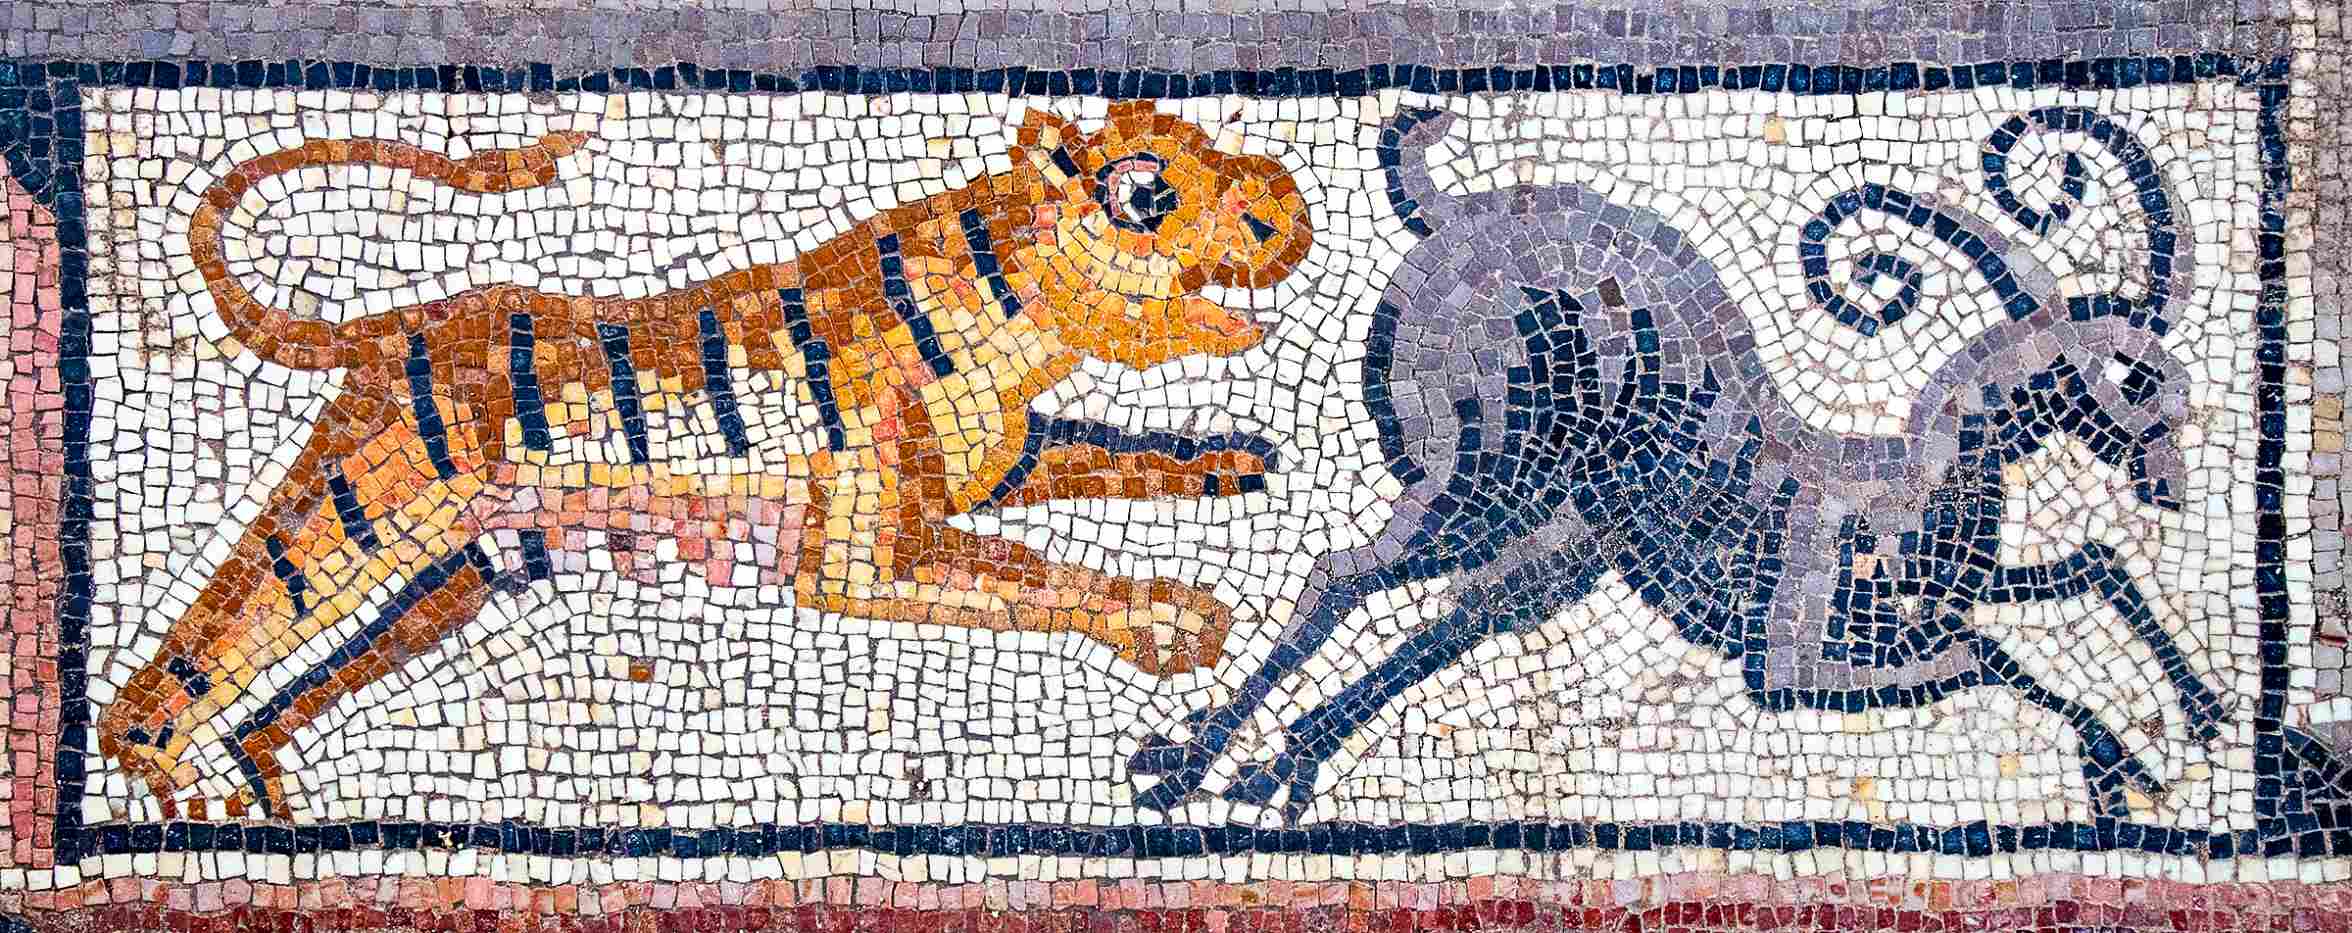 Border scene of a tiger chasing ibex - from the inscription mosaic in the Huqoq synagogue, June 2023.